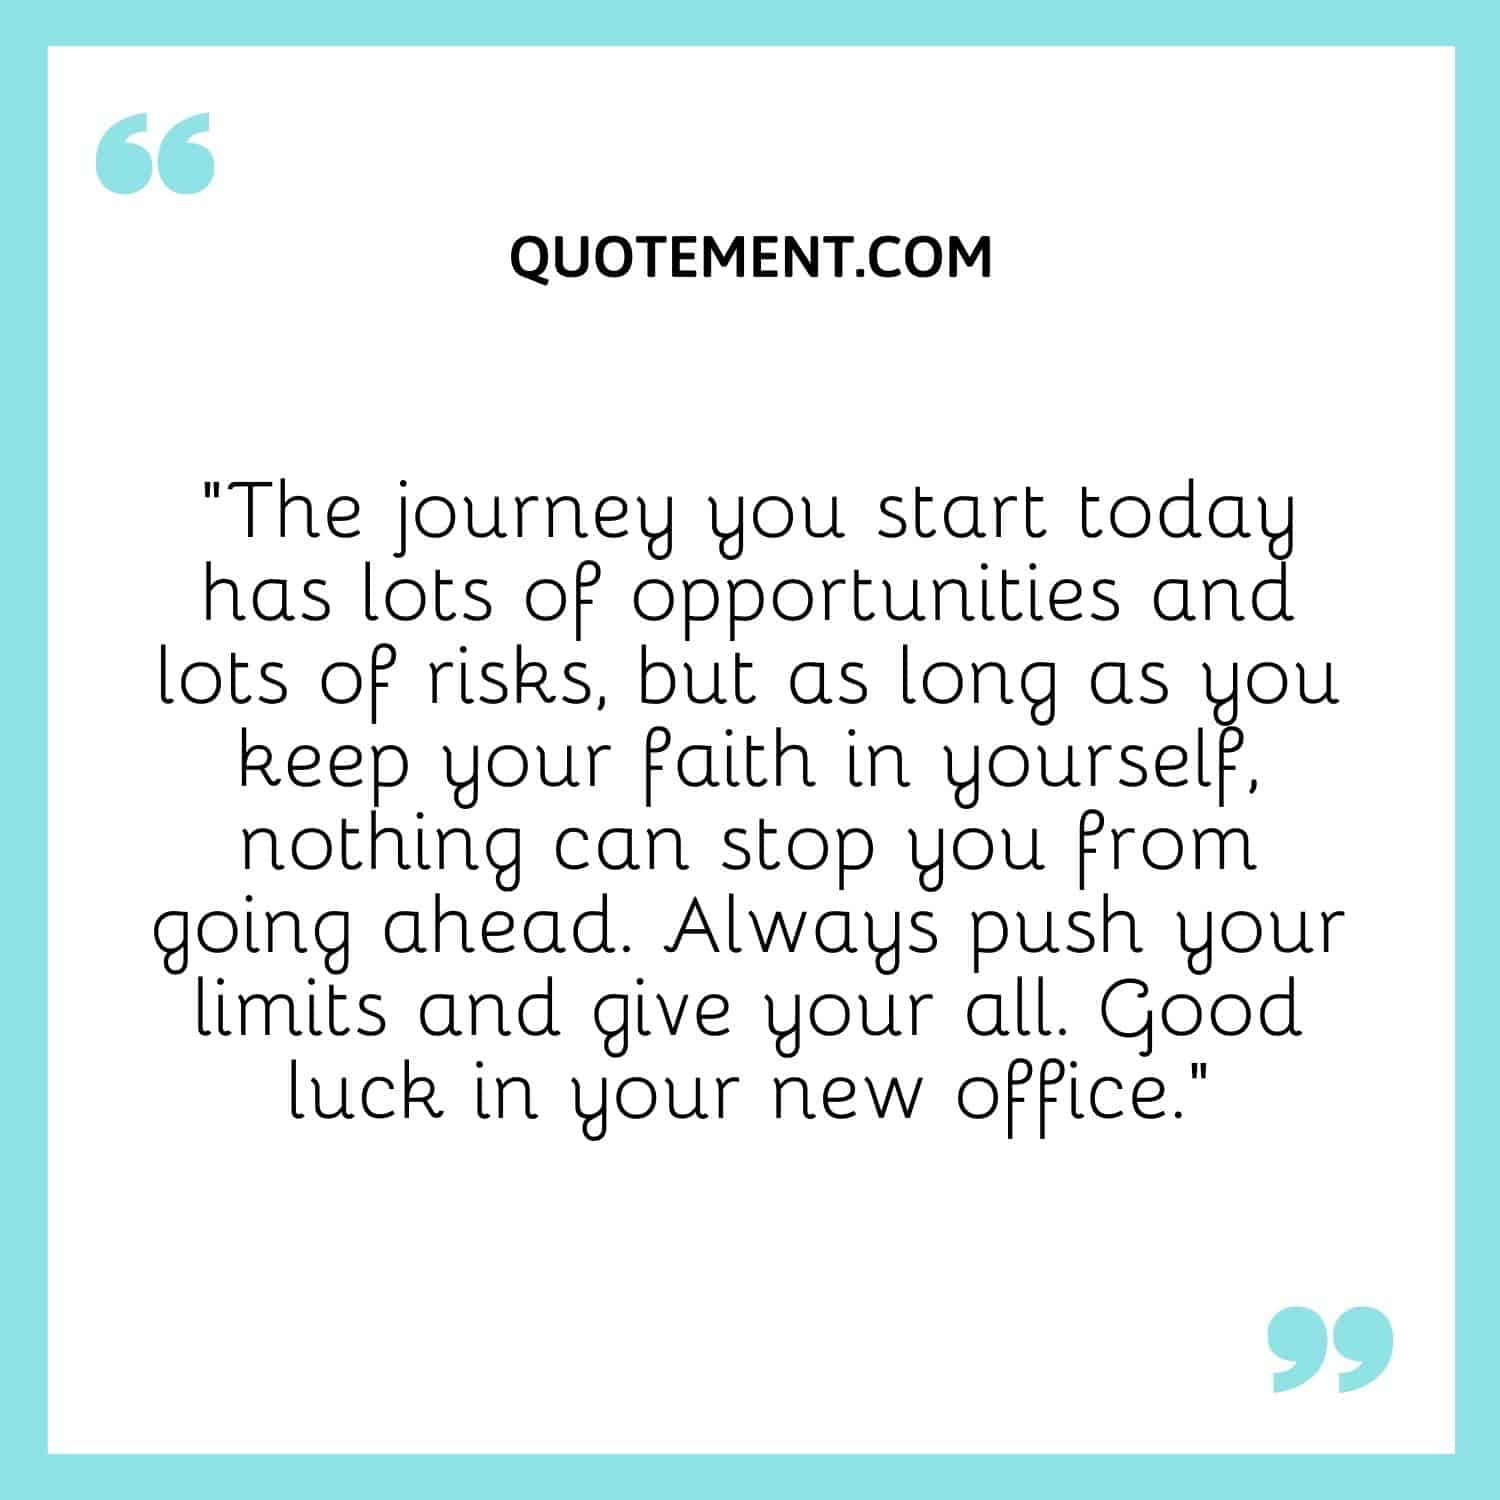 The journey you start today has lots of opportunities and lots of risks